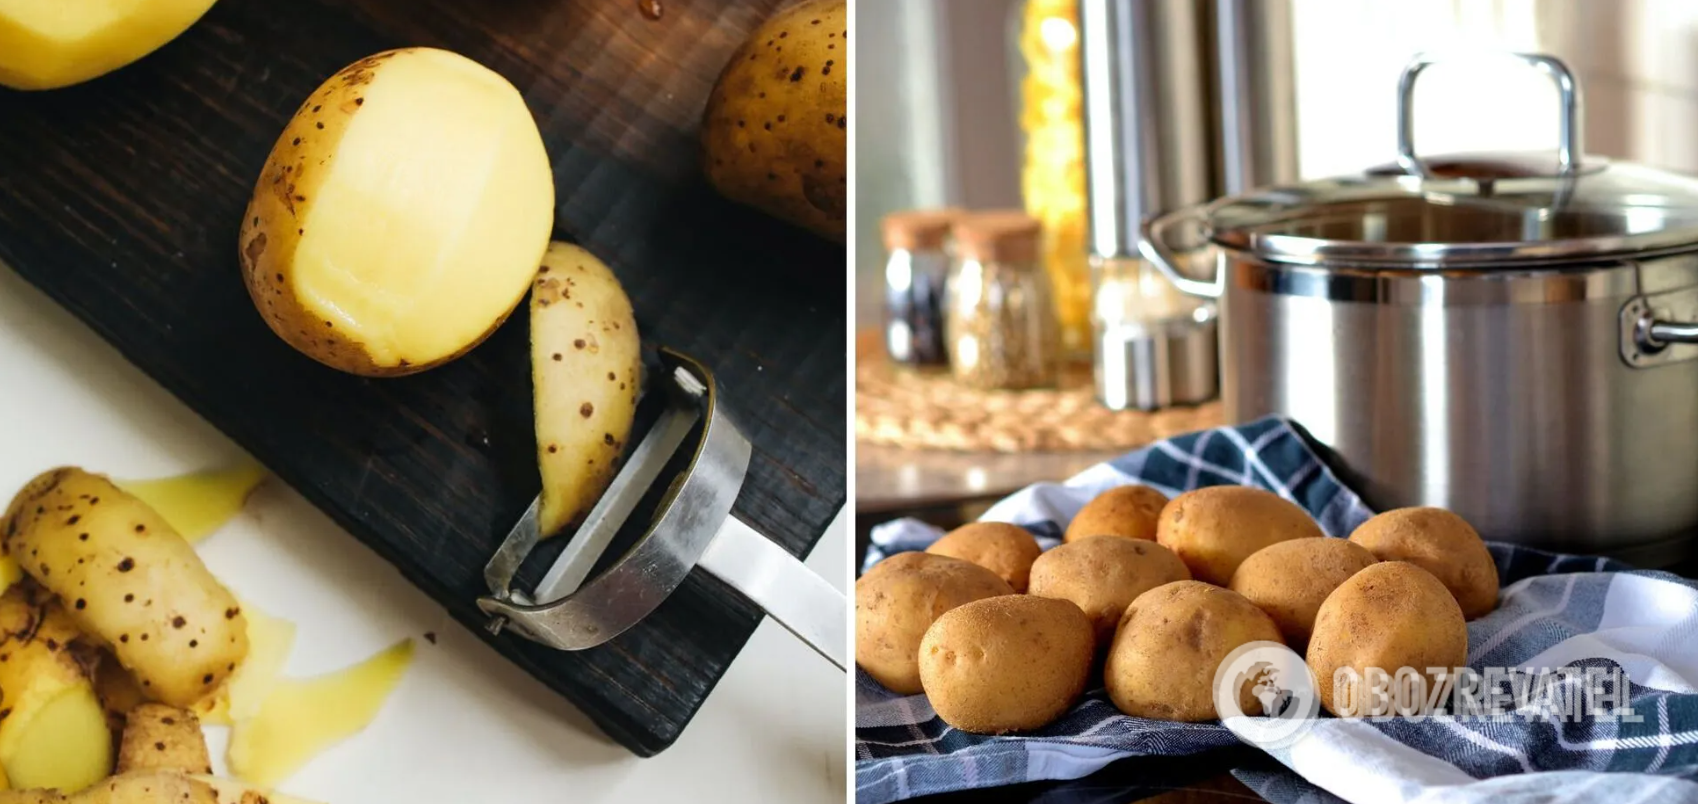 Why you should boil potatoes before baking